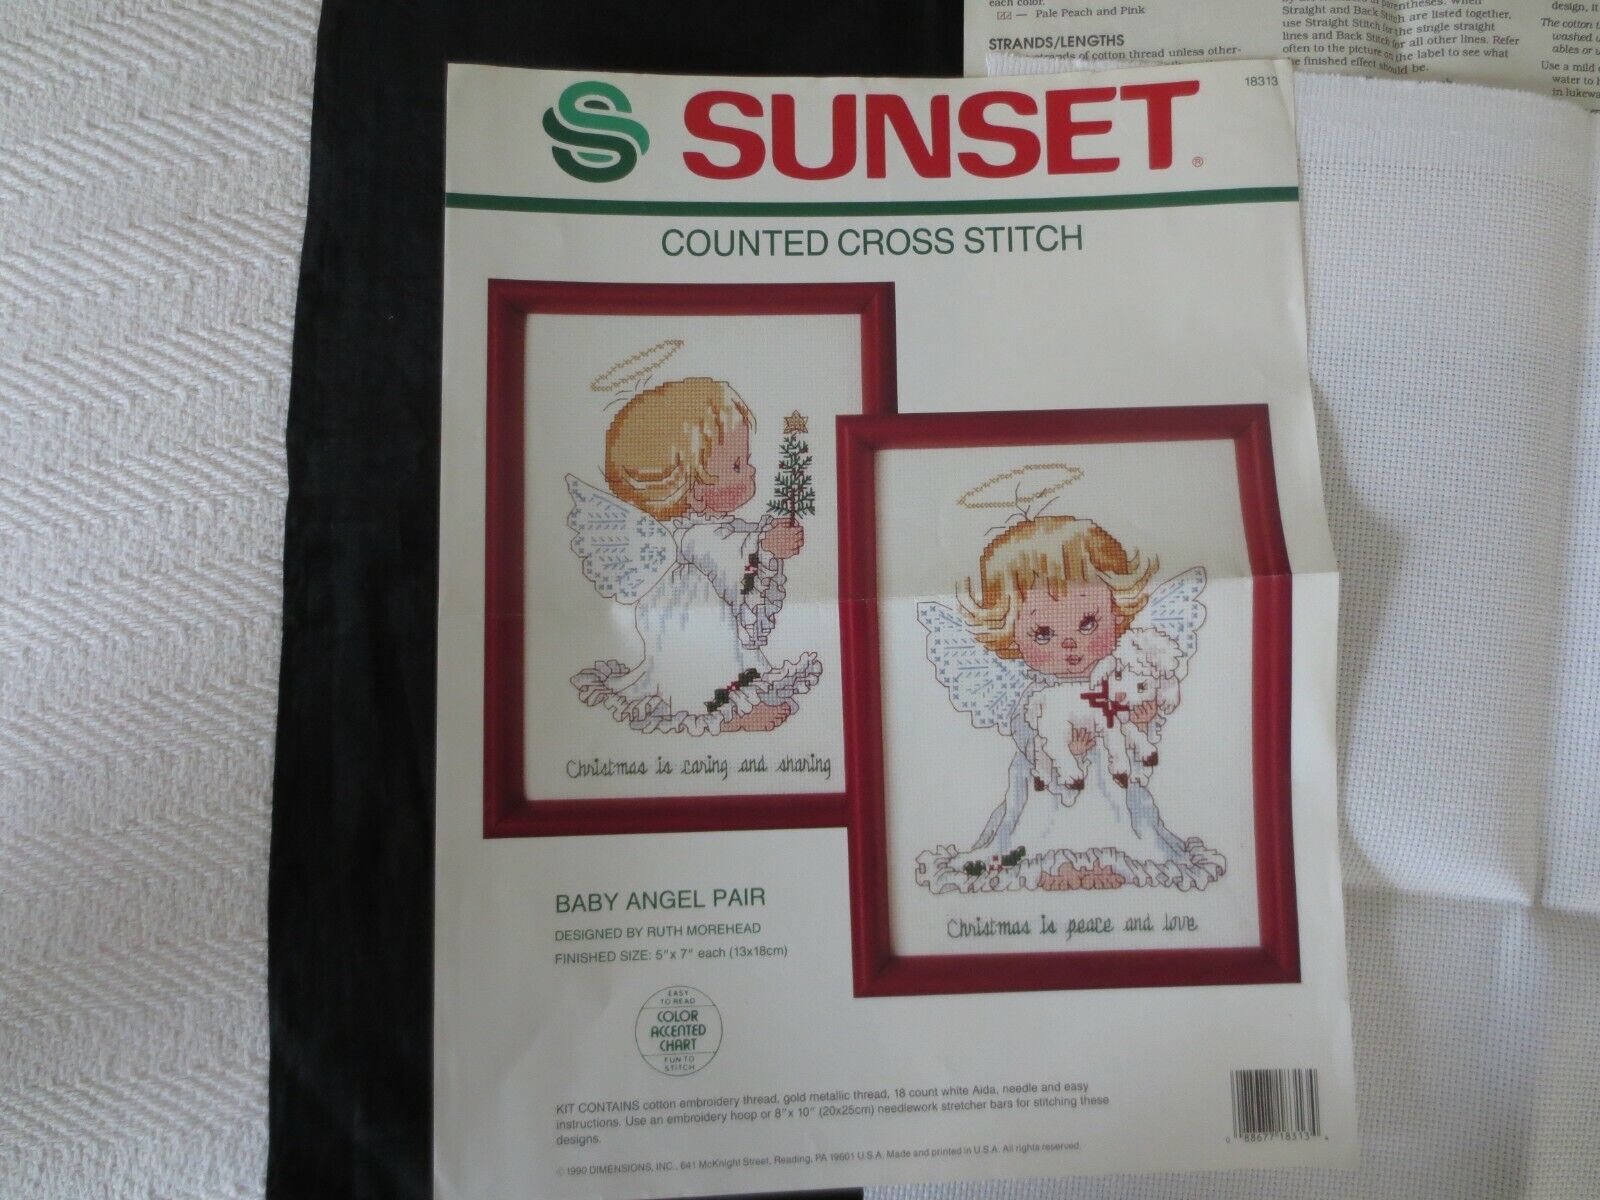 Sunset BABY ANGEL PAIR Counted Cross Stitch KIT #18313  - 5" x 7" ea. - $10.00